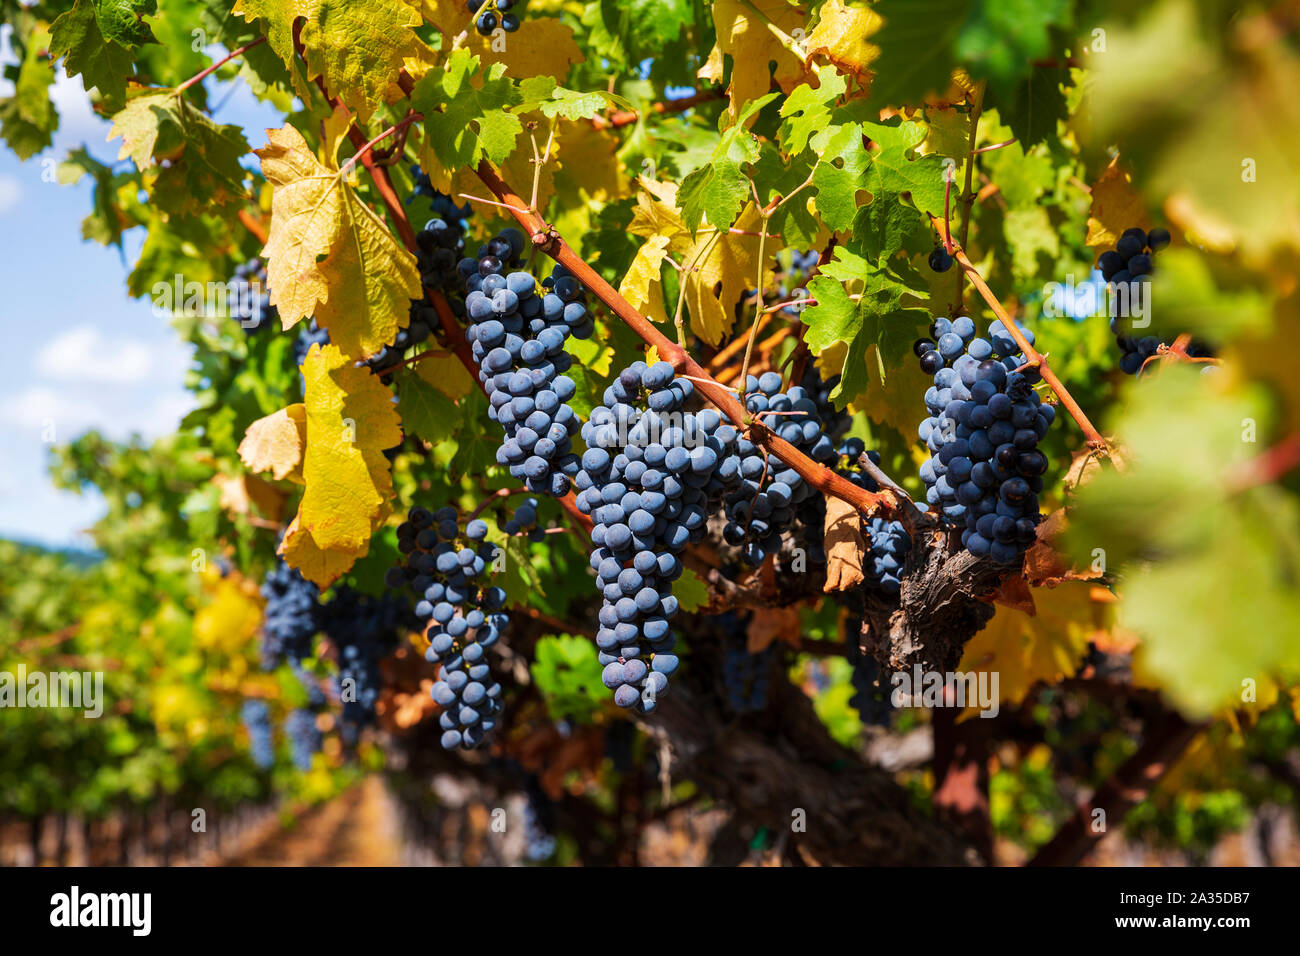 Bunches of Merlot grapes growing on the vine in a Califonian Vineyard. Stock Photo